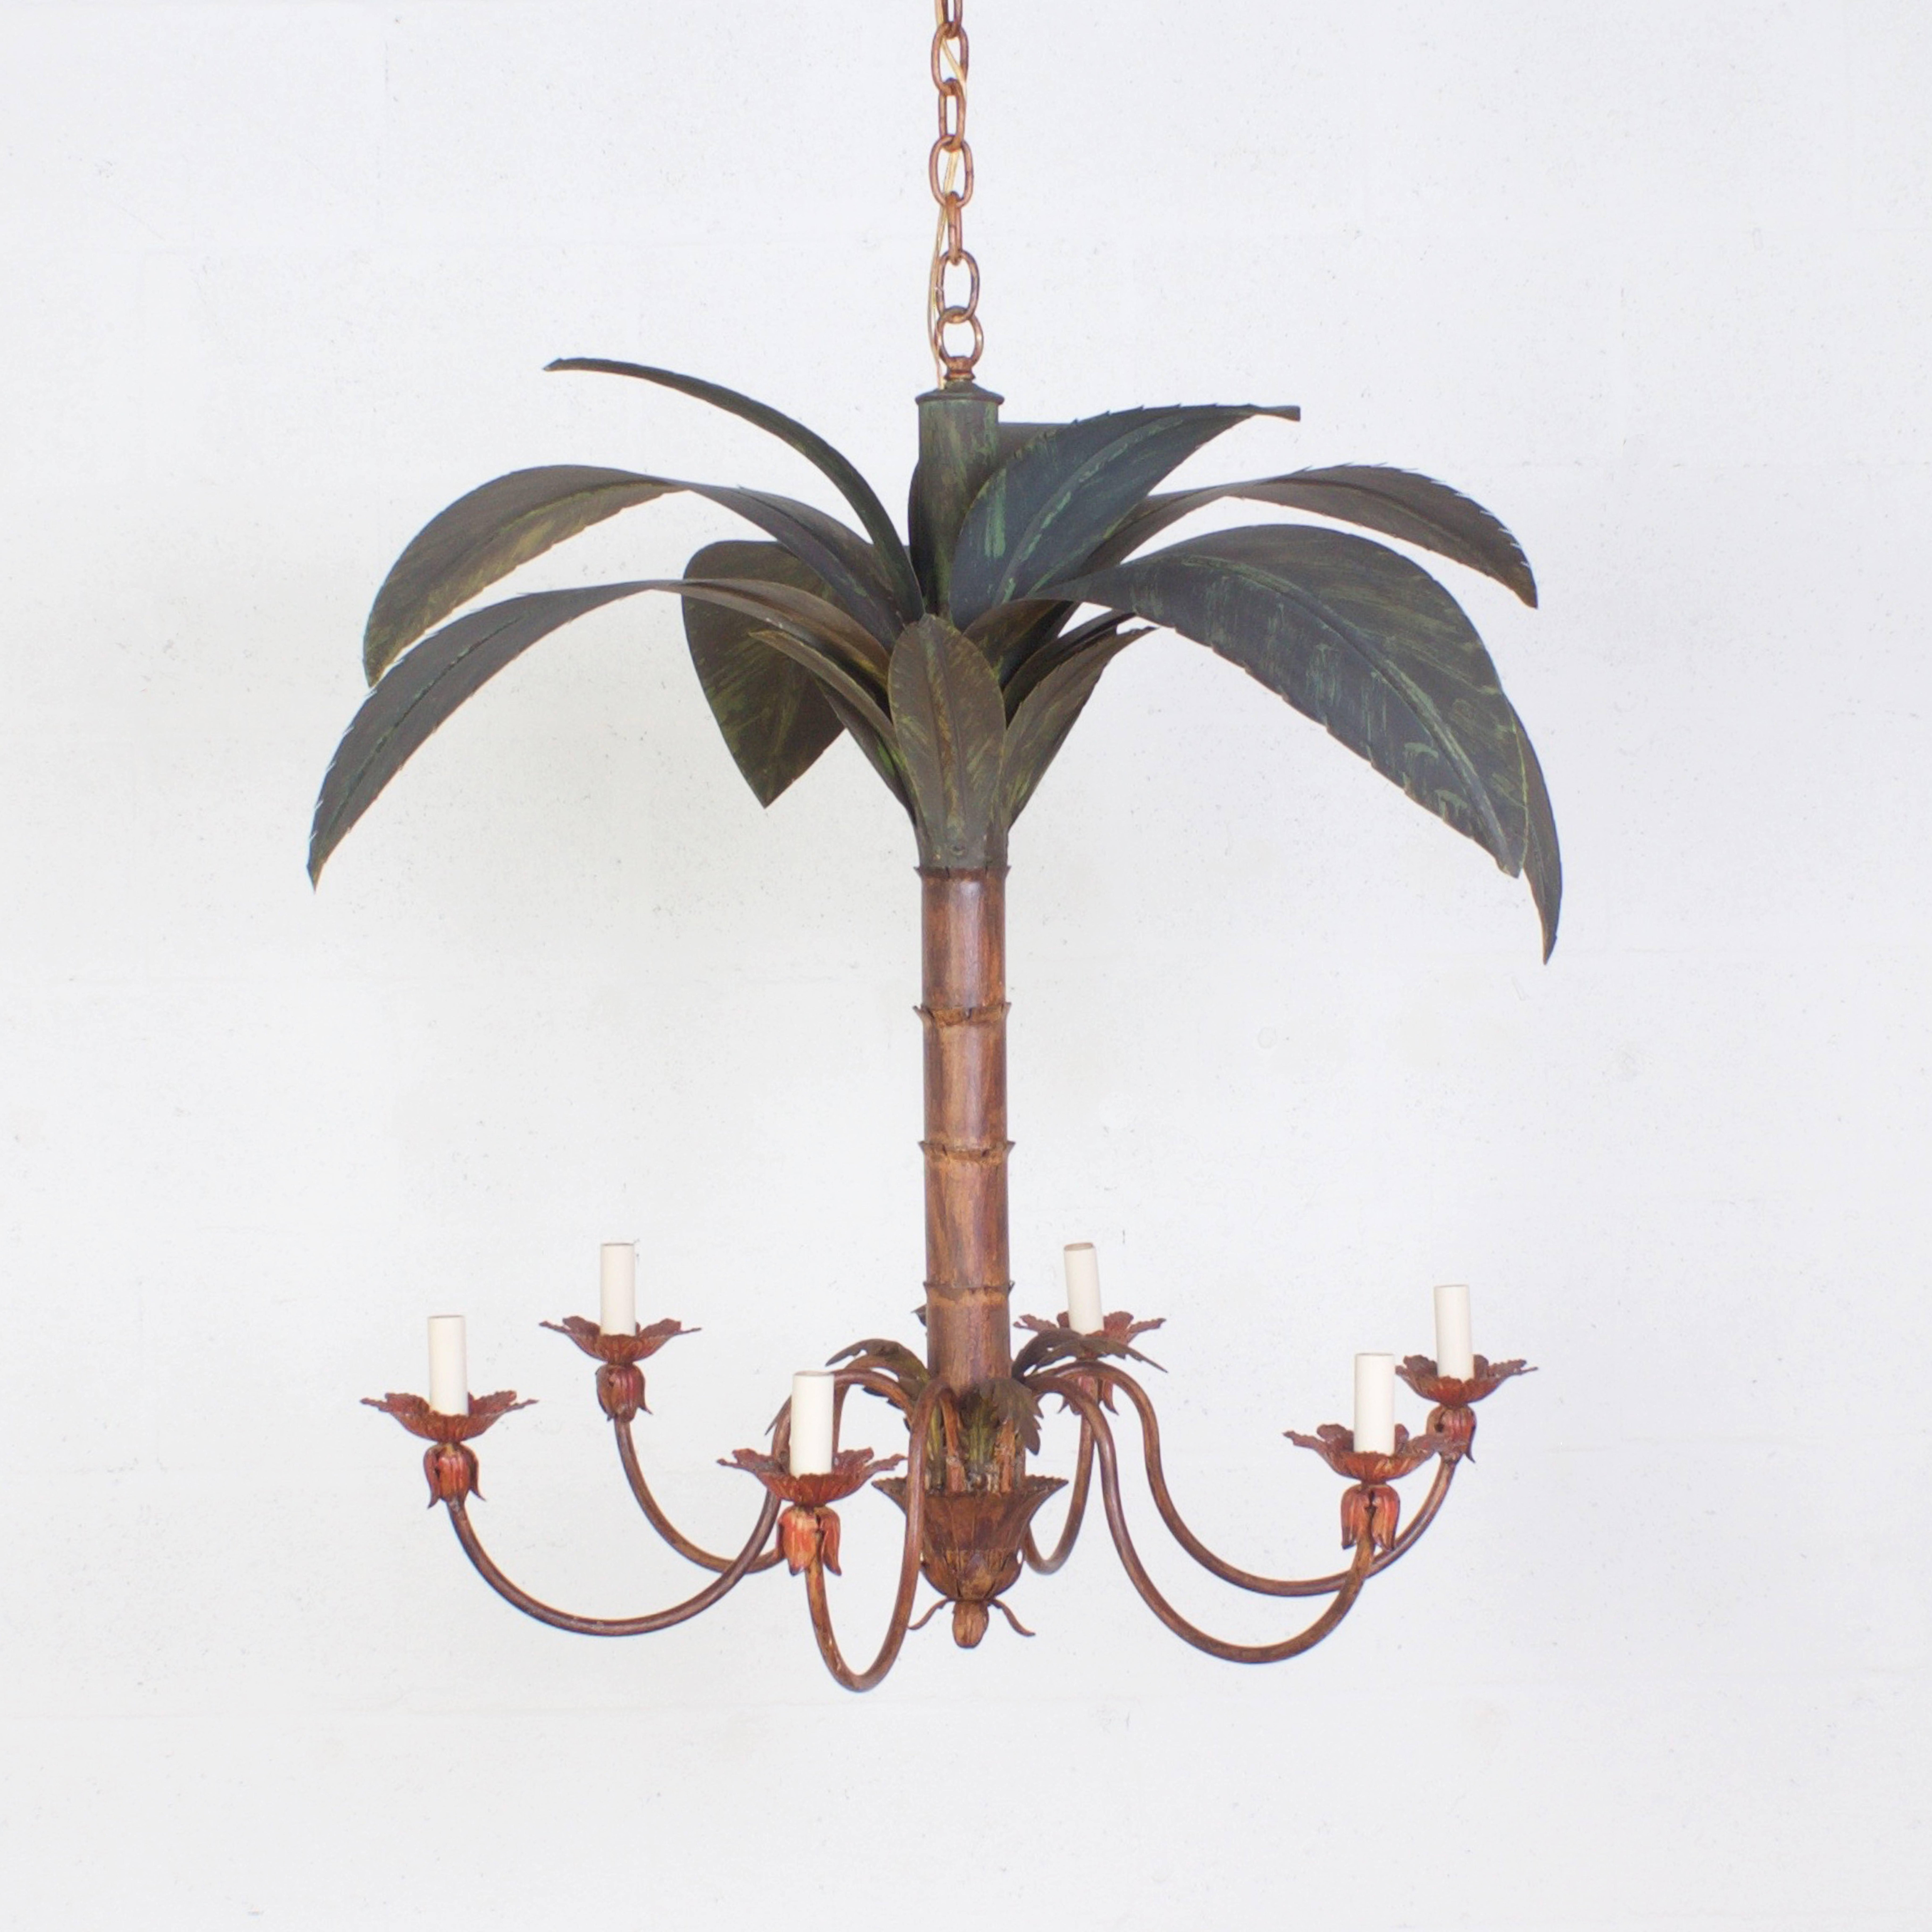 Here is a pair of whimsical, Mid-Century, tole palm tree chandeliers painted with a muted Mediterranean palette. The palm fronds have realistic seated edges and the trunk is crafted with age rings. The graceful arms have acanthus leaves around the